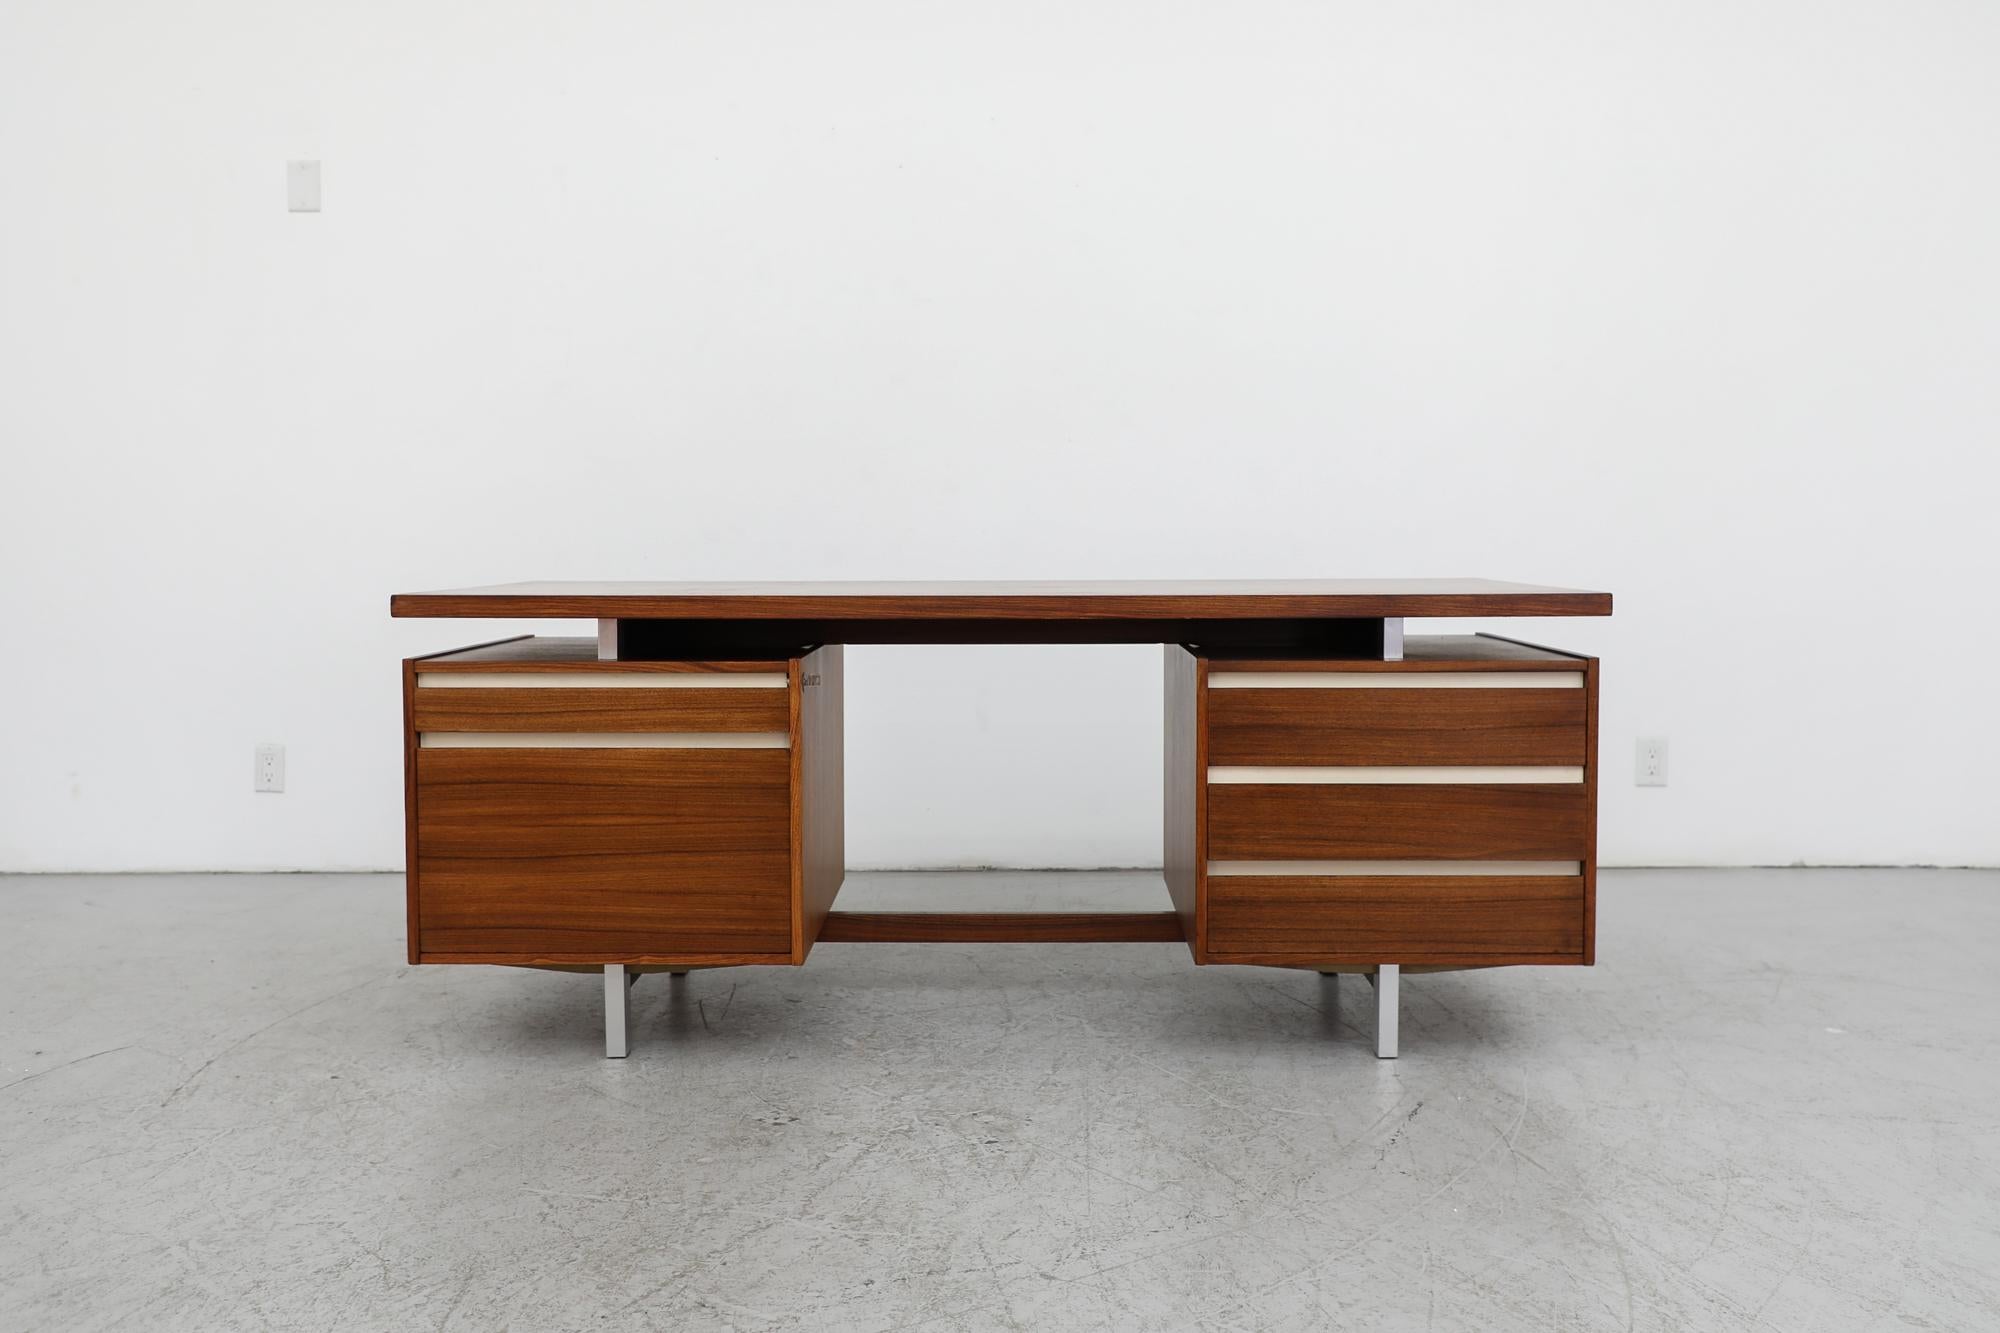 Mid-Century, Kho Liang Ie designed executive J desk from the J series, produced by Dutch furniture manufacturer Fristho from 1956 to 1960. Kho Liang Ie was born in 1927 in Magelang, Dutch East Indies. After Indonesia's independence in 1949, the